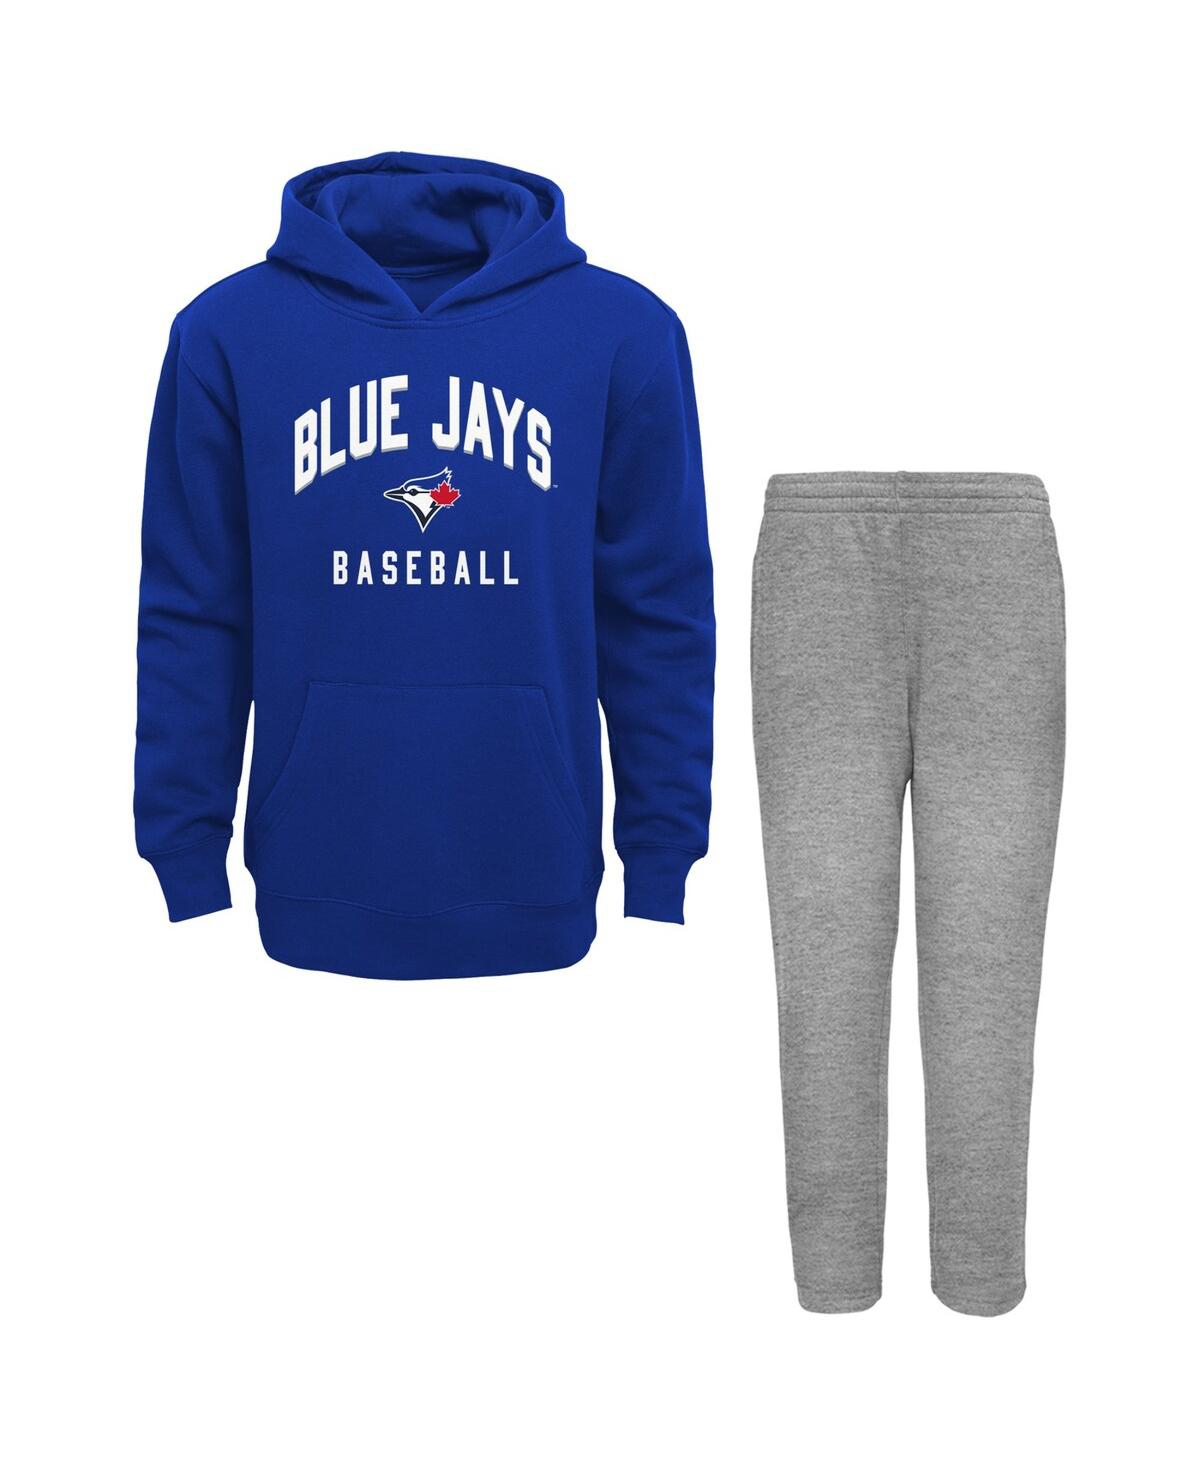 Outerstuff Babies' Toddler Boys And Girls Royal, Gray Toronto Blue Jays Play-by-play Pullover Fleece Hoodie And Pants S In Royal,gray